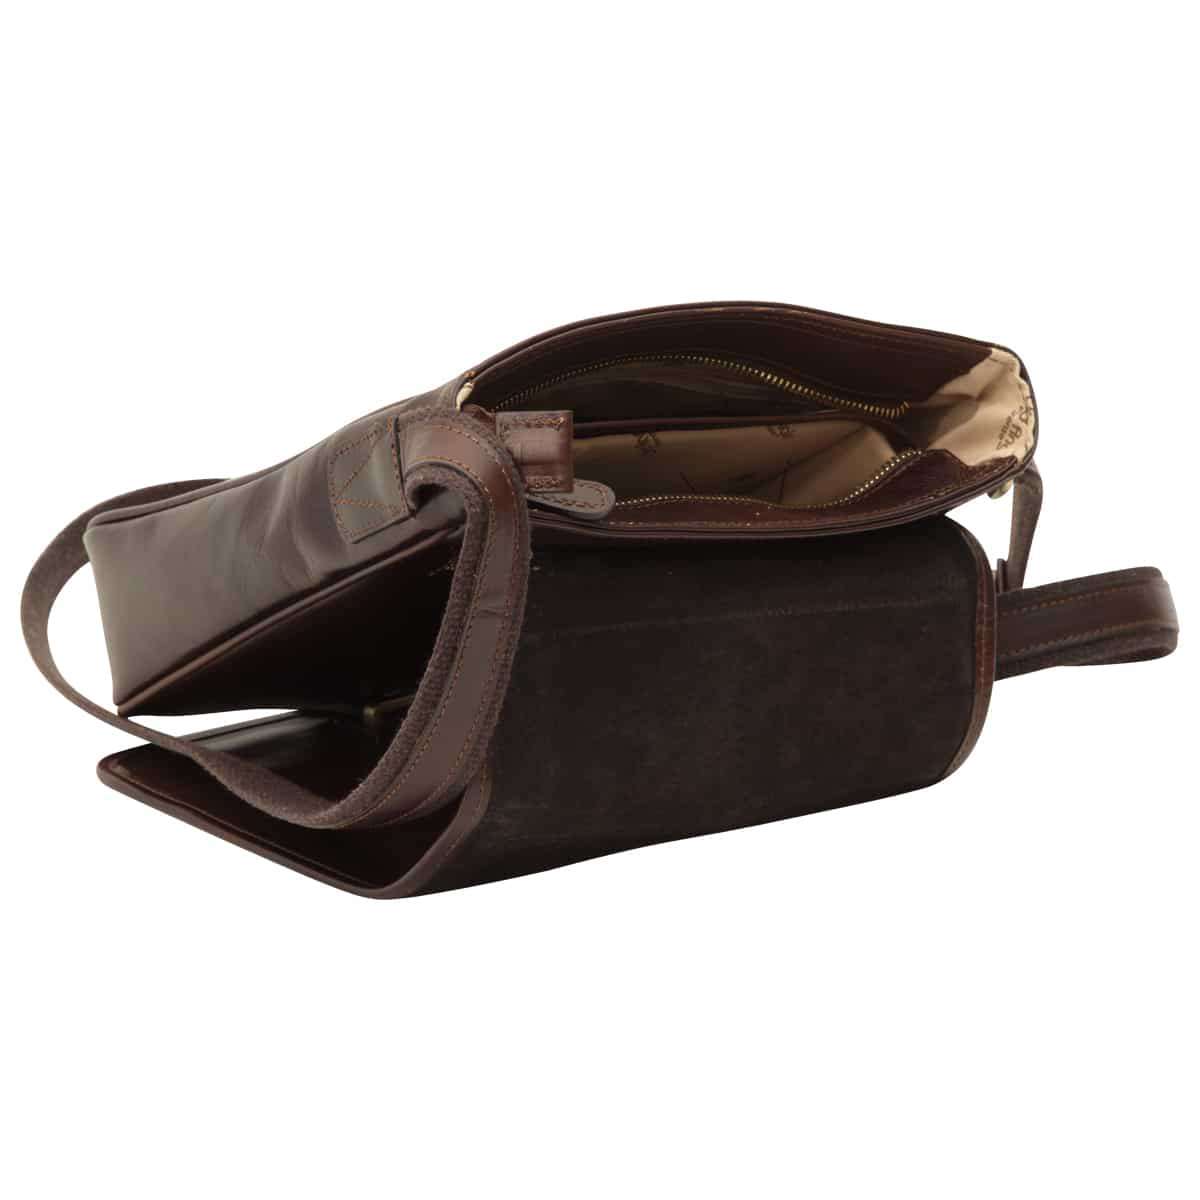 Small leather bag with magnetic closure - Dark Brown | 406689TM US | Old Angler Firenze